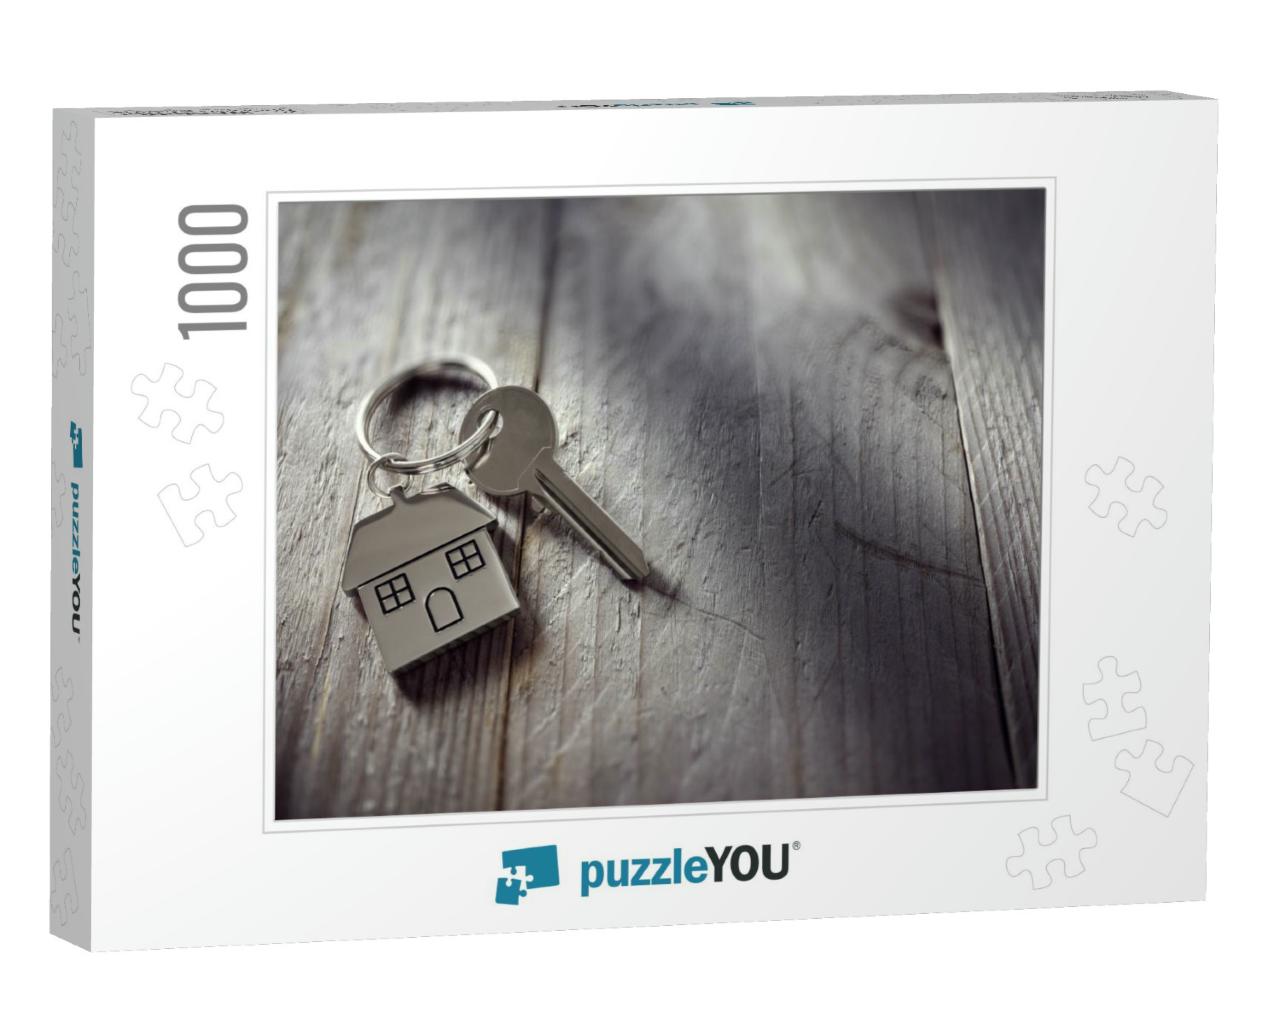 House Key on a House Shaped Keychain Resting on Wo... Jigsaw Puzzle with 1000 pieces